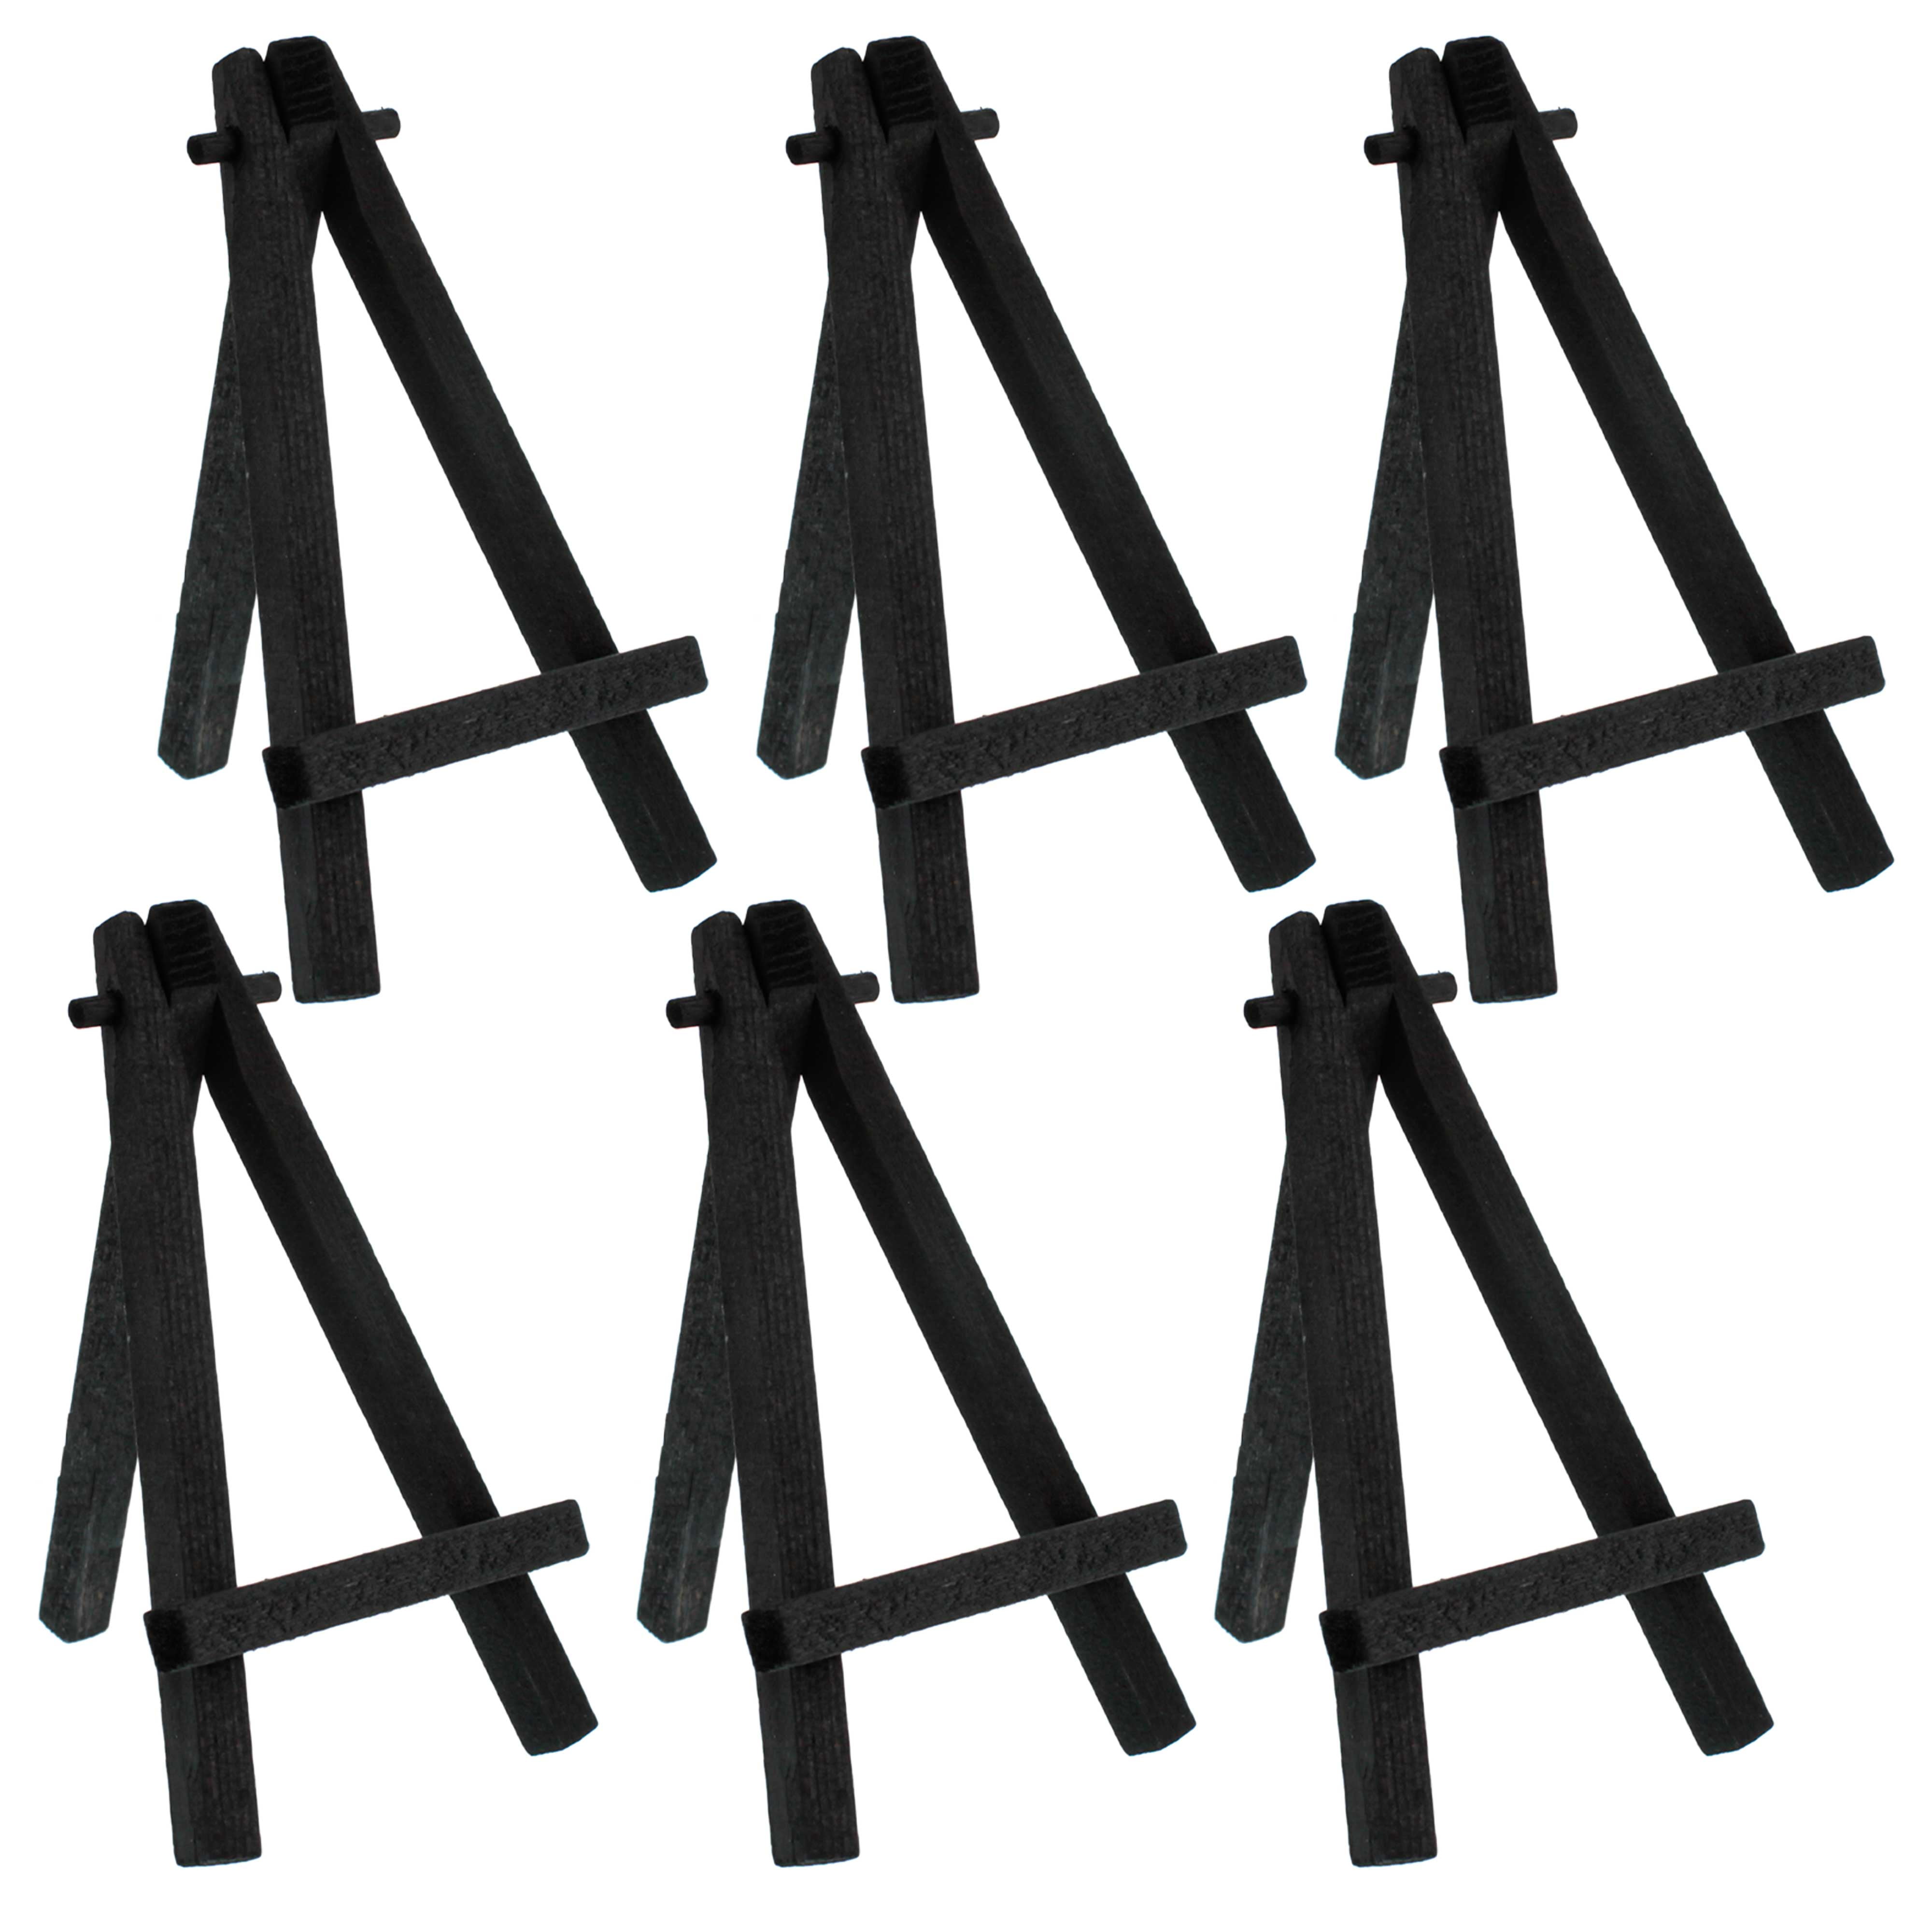 10 New 5 inch Plastic Display Stands Plates/ Photos/ Craft /Art  Easel Style 